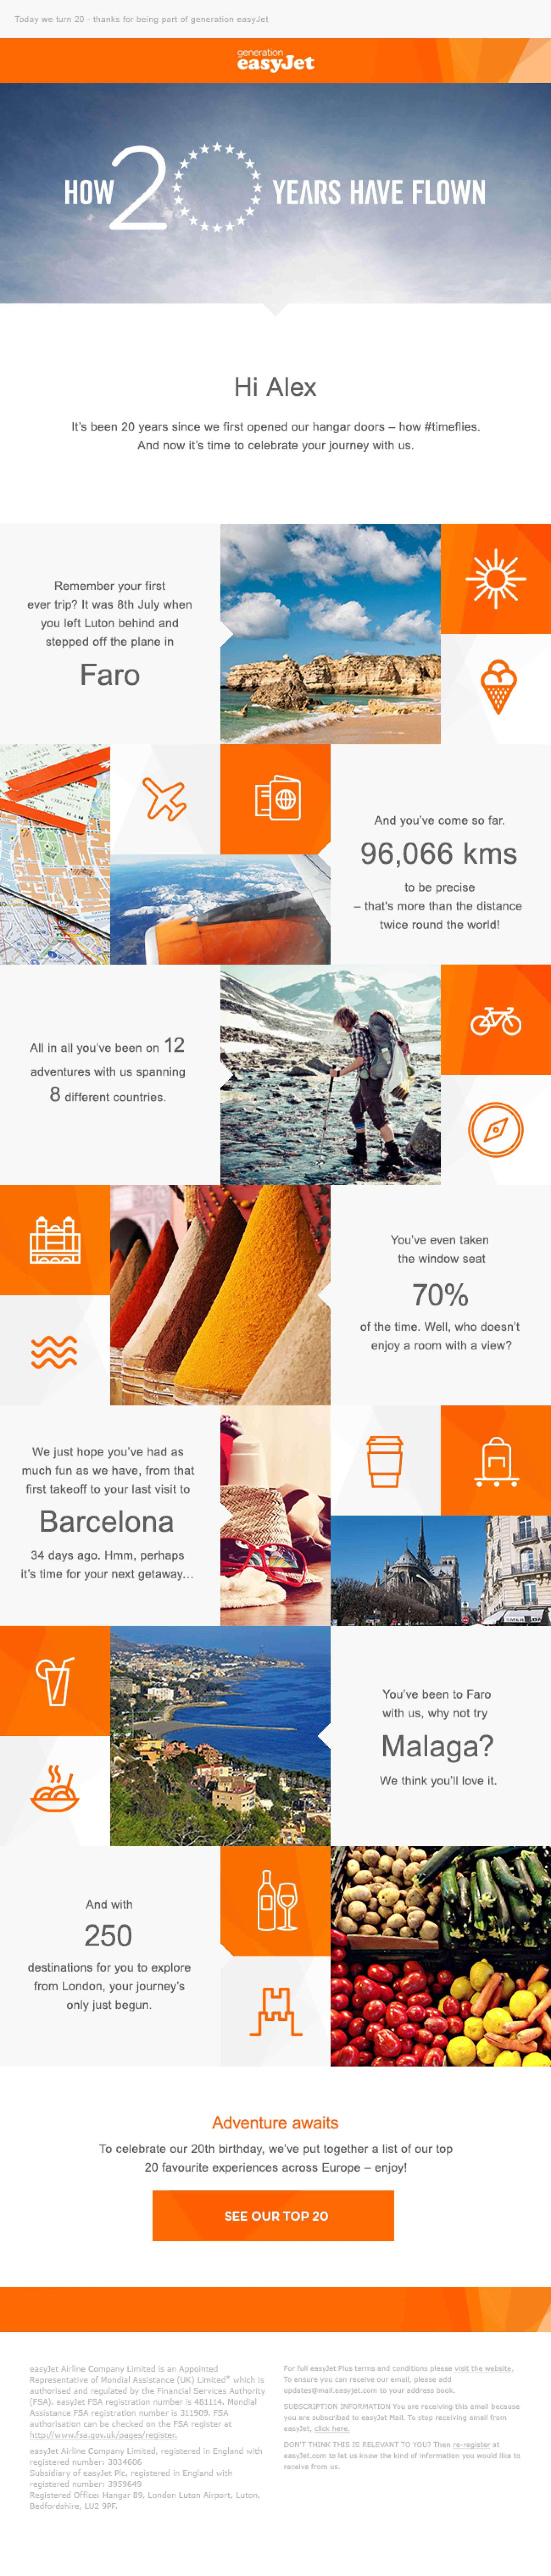 EasyJet’s lowdown on every client’s journey with them